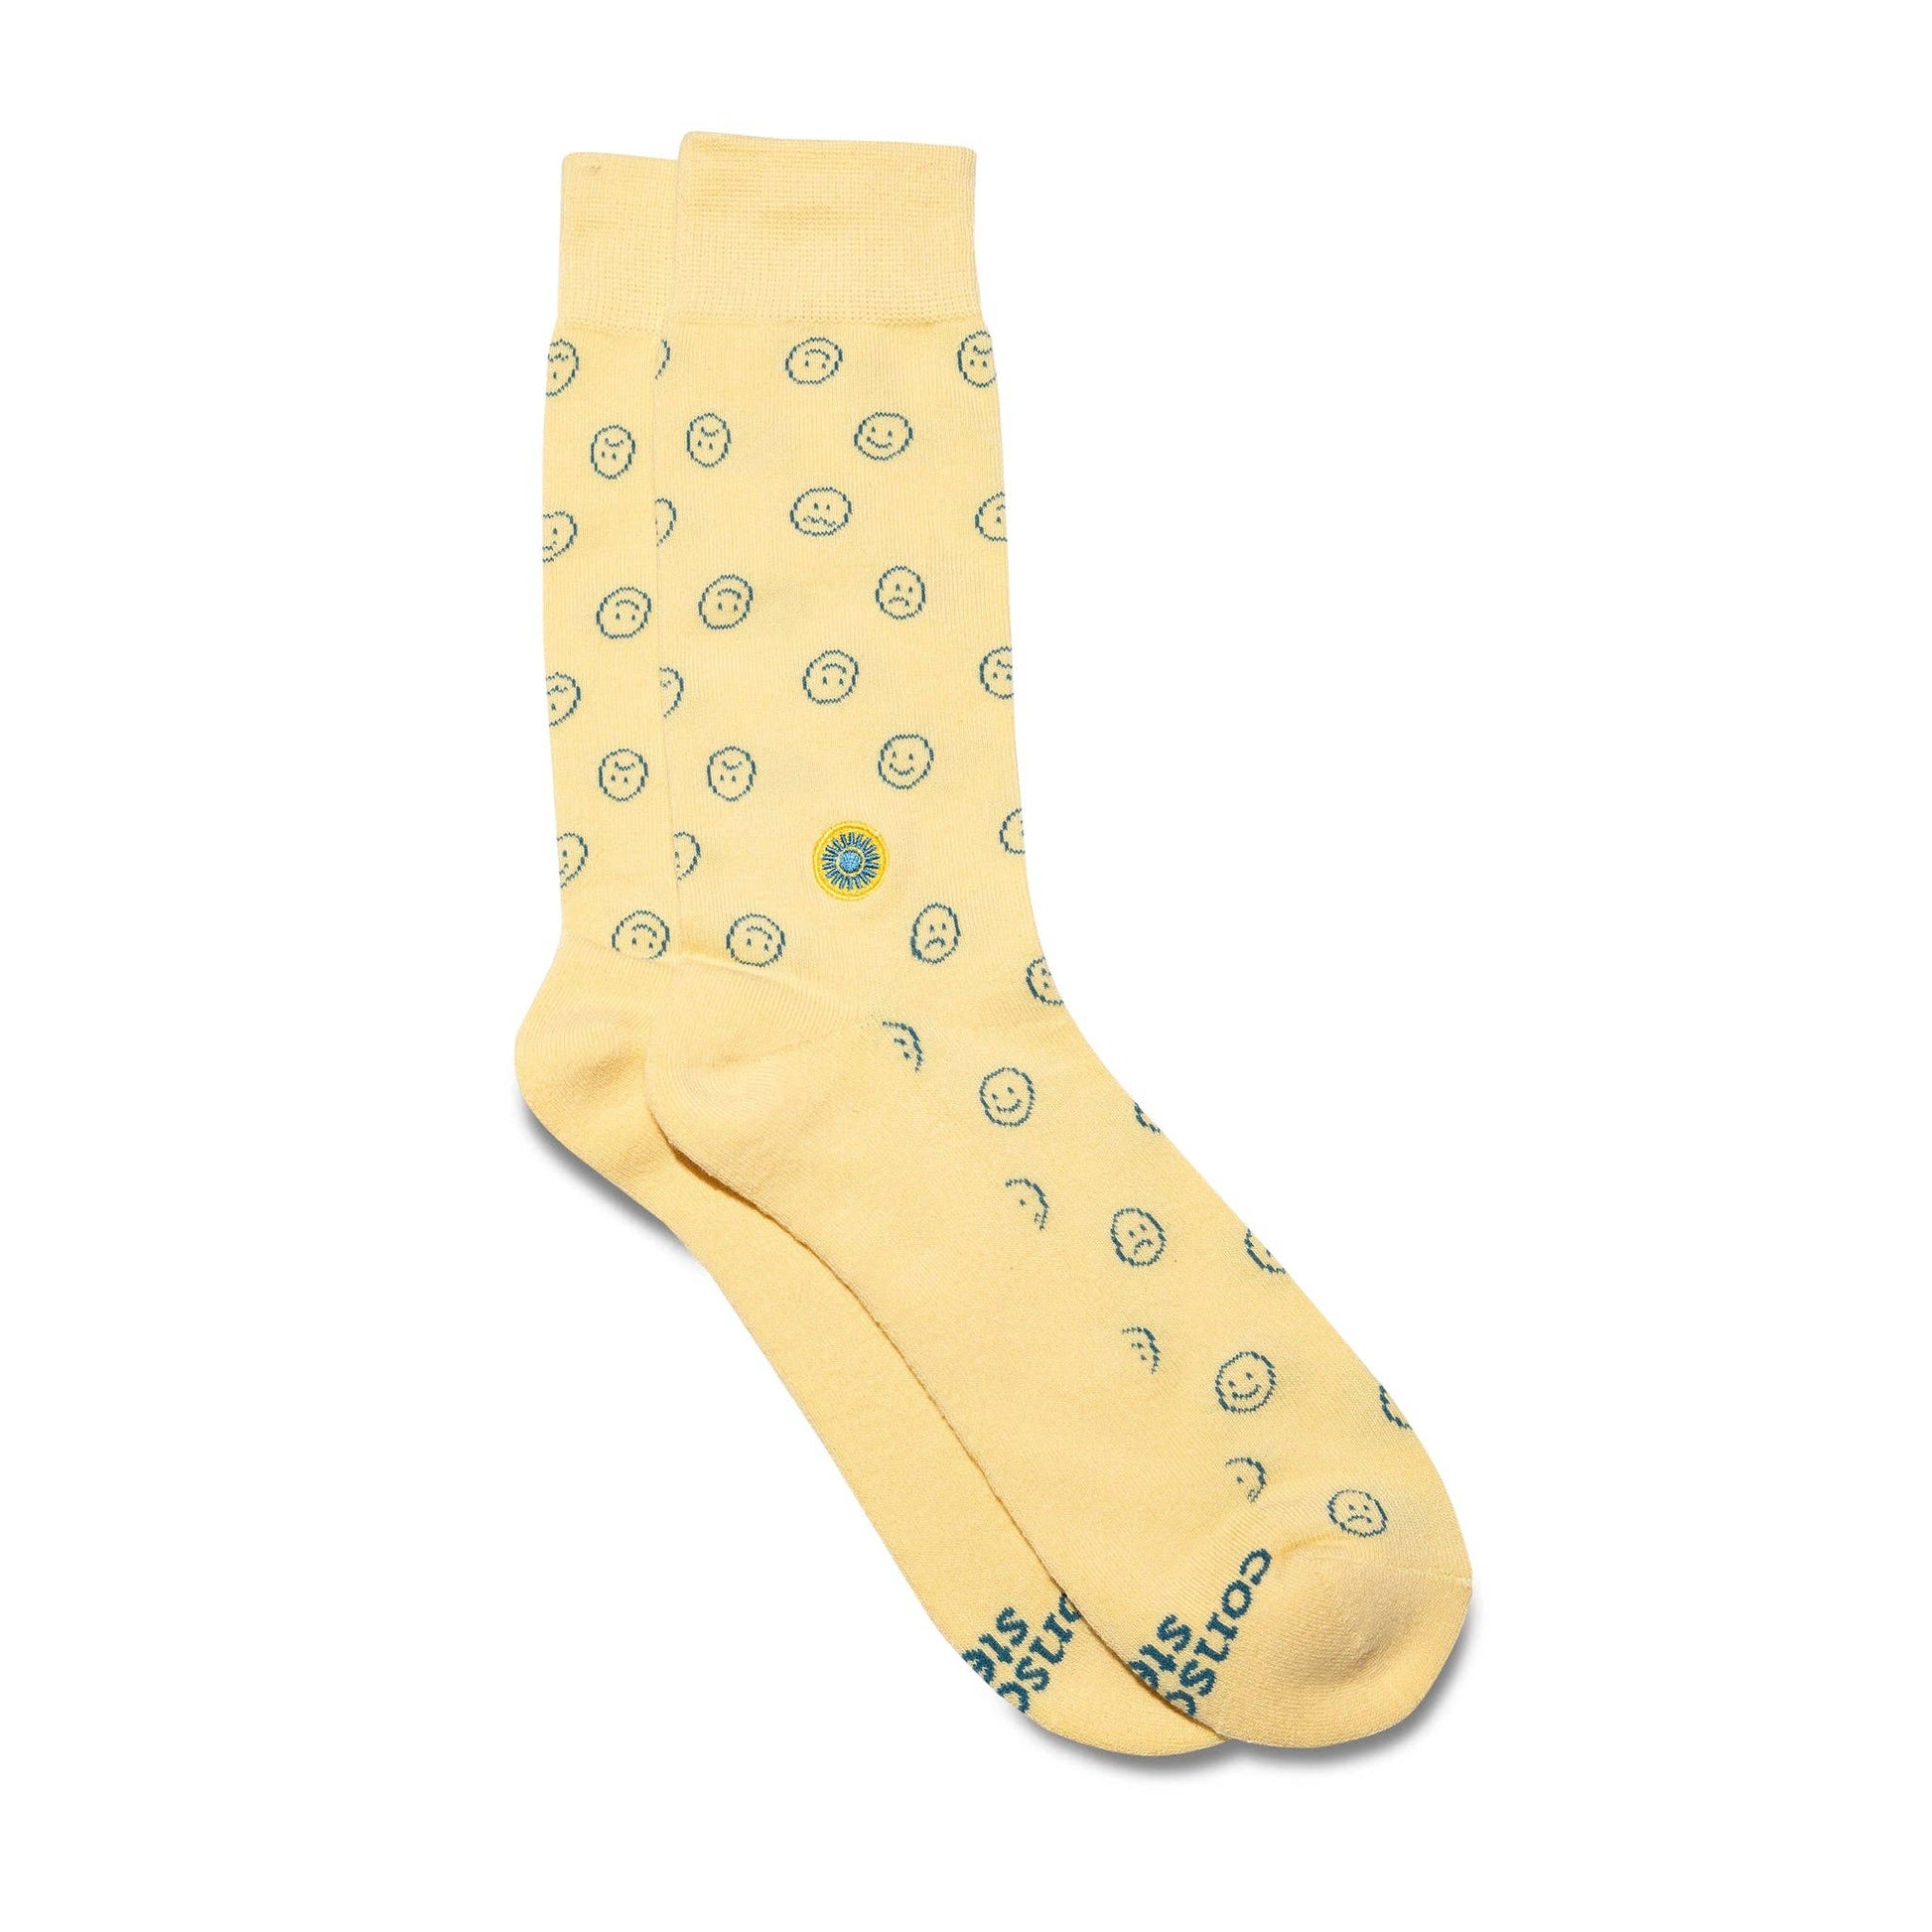 Conscious Step - Socks that Support Mental Health (Smiley Faces)  Conscious Step   -better made easy-eco-friendly-sustainable-gifting